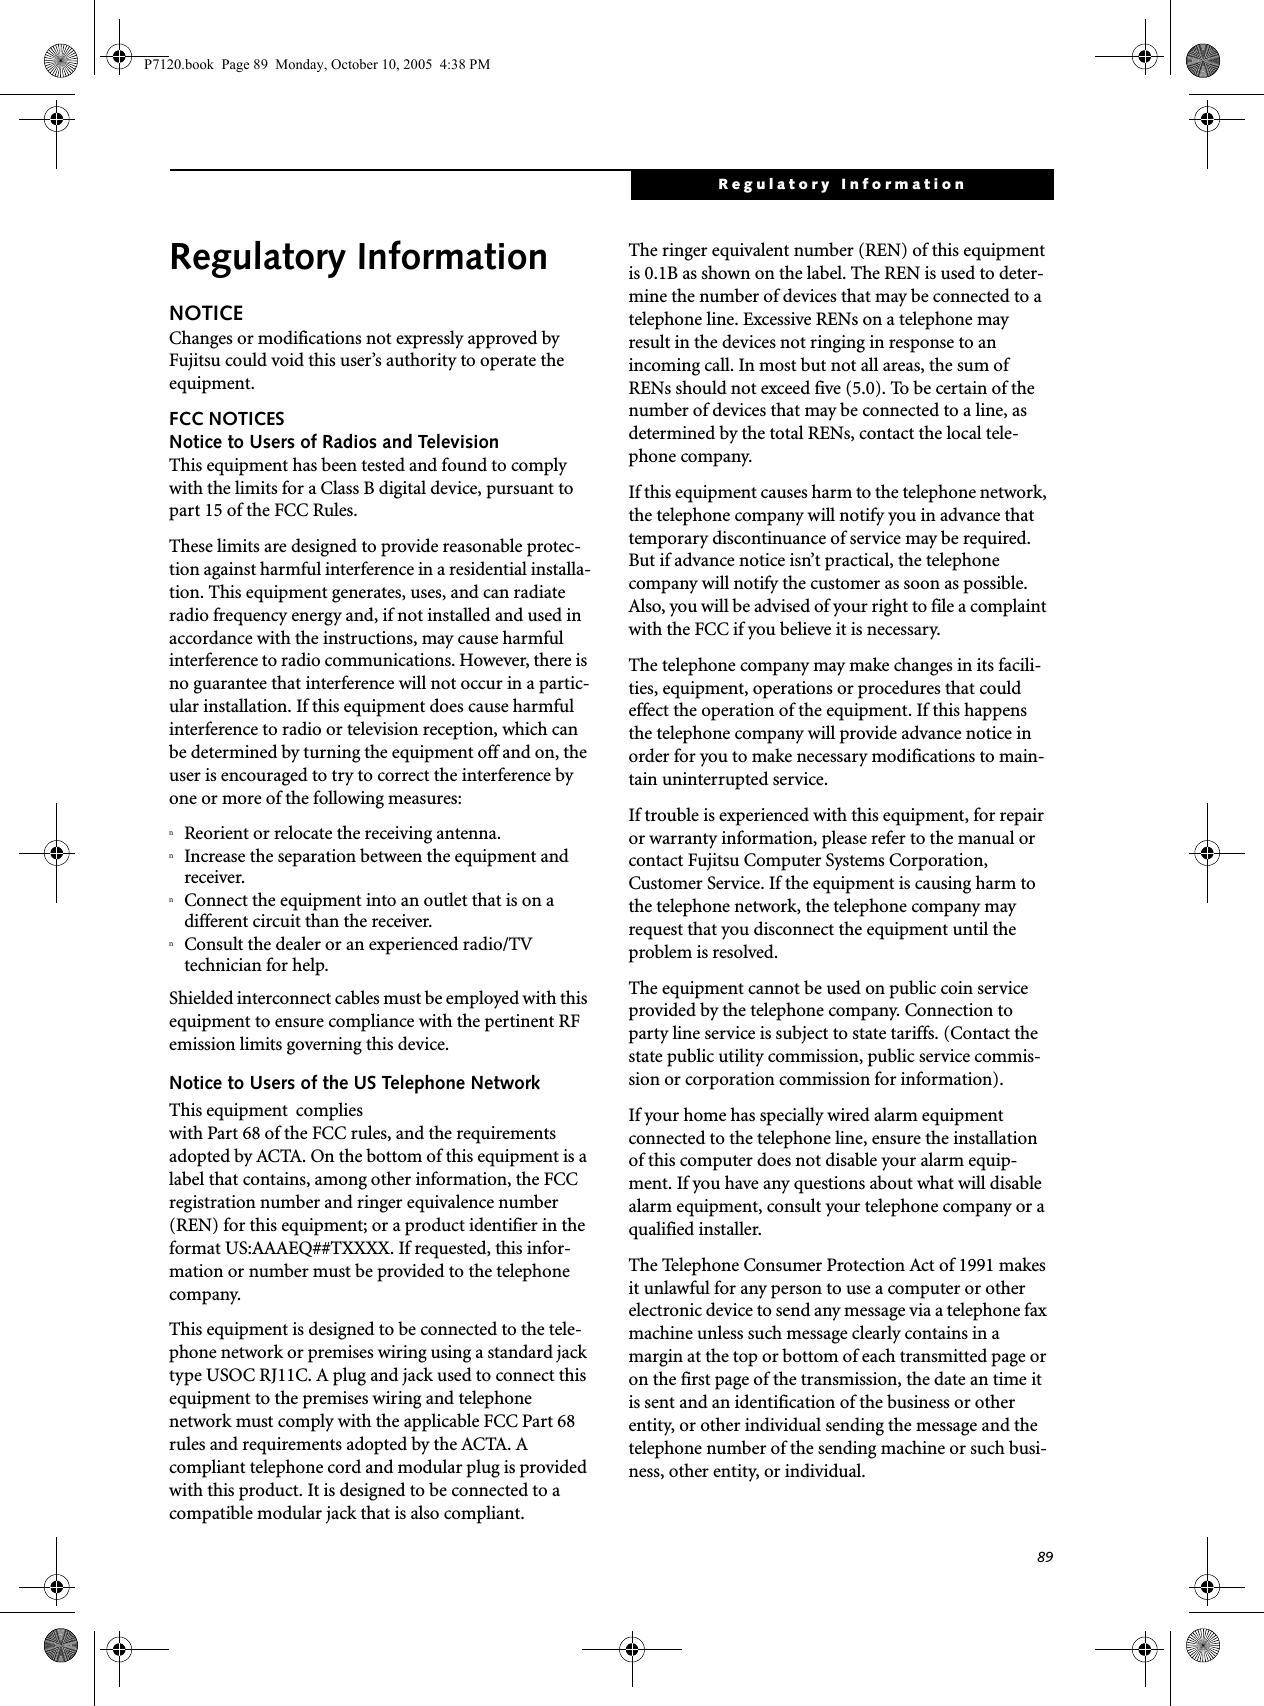 89Regulatory InformationRegulatory InformationNOTICEChanges or modifications not expressly approved by Fujitsu could void this user’s authority to operate the equipment.FCC NOTICESNotice to Users of Radios and TelevisionThis equipment has been tested and found to comply with the limits for a Class B digital device, pursuant to part 15 of the FCC Rules.These limits are designed to provide reasonable protec-tion against harmful interference in a residential installa-tion. This equipment generates, uses, and can radiate radio frequency energy and, if not installed and used in accordance with the instructions, may cause harmful interference to radio communications. However, there is no guarantee that interference will not occur in a partic-ular installation. If this equipment does cause harmful interference to radio or television reception, which can be determined by turning the equipment off and on, the user is encouraged to try to correct the interference by one or more of the following measures:nReorient or relocate the receiving antenna.nIncrease the separation between the equipment and receiver.nConnect the equipment into an outlet that is on a different circuit than the receiver.nConsult the dealer or an experienced radio/TVtechnician for help.Shielded interconnect cables must be employed with this equipment to ensure compliance with the pertinent RF emission limits governing this device. Notice to Users of the US Telephone NetworkThis equipment  complieswith Part 68 of the FCC rules, and the requirements adopted by ACTA. On the bottom of this equipment is a label that contains, among other information, the FCC registration number and ringer equivalence number (REN) for this equipment; or a product identifier in the format US:AAAEQ##TXXXX. If requested, this infor-mation or number must be provided to the telephone company.This equipment is designed to be connected to the tele-phone network or premises wiring using a standard jack type USOC RJ11C. A plug and jack used to connect this equipment to the premises wiring and telephone network must comply with the applicable FCC Part 68 rules and requirements adopted by the ACTA. A compliant telephone cord and modular plug is provided with this product. It is designed to be connected to a compatible modular jack that is also compliant.The ringer equivalent number (REN) of this equipment is 0.1B as shown on the label. The REN is used to deter-mine the number of devices that may be connected to a telephone line. Excessive RENs on a telephone may result in the devices not ringing in response to an incoming call. In most but not all areas, the sum of RENs should not exceed five (5.0). To be certain of the number of devices that may be connected to a line, as determined by the total RENs, contact the local tele-phone company. If this equipment causes harm to the telephone network, the telephone company will notify you in advance that temporary discontinuance of service may be required. But if advance notice isn’t practical, the telephone company will notify the customer as soon as possible. Also, you will be advised of your right to file a complaint with the FCC if you believe it is necessary.The telephone company may make changes in its facili-ties, equipment, operations or procedures that could effect the operation of the equipment. If this happens the telephone company will provide advance notice in order for you to make necessary modifications to main-tain uninterrupted service. If trouble is experienced with this equipment, for repair or warranty information, please refer to the manual or contact Fujitsu Computer Systems Corporation, Customer Service. If the equipment is causing harm to the telephone network, the telephone company may request that you disconnect the equipment until the problem is resolved.The equipment cannot be used on public coin service provided by the telephone company. Connection to party line service is subject to state tariffs. (Contact the state public utility commission, public service commis-sion or corporation commission for information). If your home has specially wired alarm equipment connected to the telephone line, ensure the installation of this computer does not disable your alarm equip-ment. If you have any questions about what will disable alarm equipment, consult your telephone company or a qualified installer.The Telephone Consumer Protection Act of 1991 makes it unlawful for any person to use a computer or other electronic device to send any message via a telephone fax machine unless such message clearly contains in a margin at the top or bottom of each transmitted page or on the first page of the transmission, the date an time it is sent and an identification of the business or other entity, or other individual sending the message and the telephone number of the sending machine or such busi-ness, other entity, or individual.P7120.book  Page 89  Monday, October 10, 2005  4:38 PM